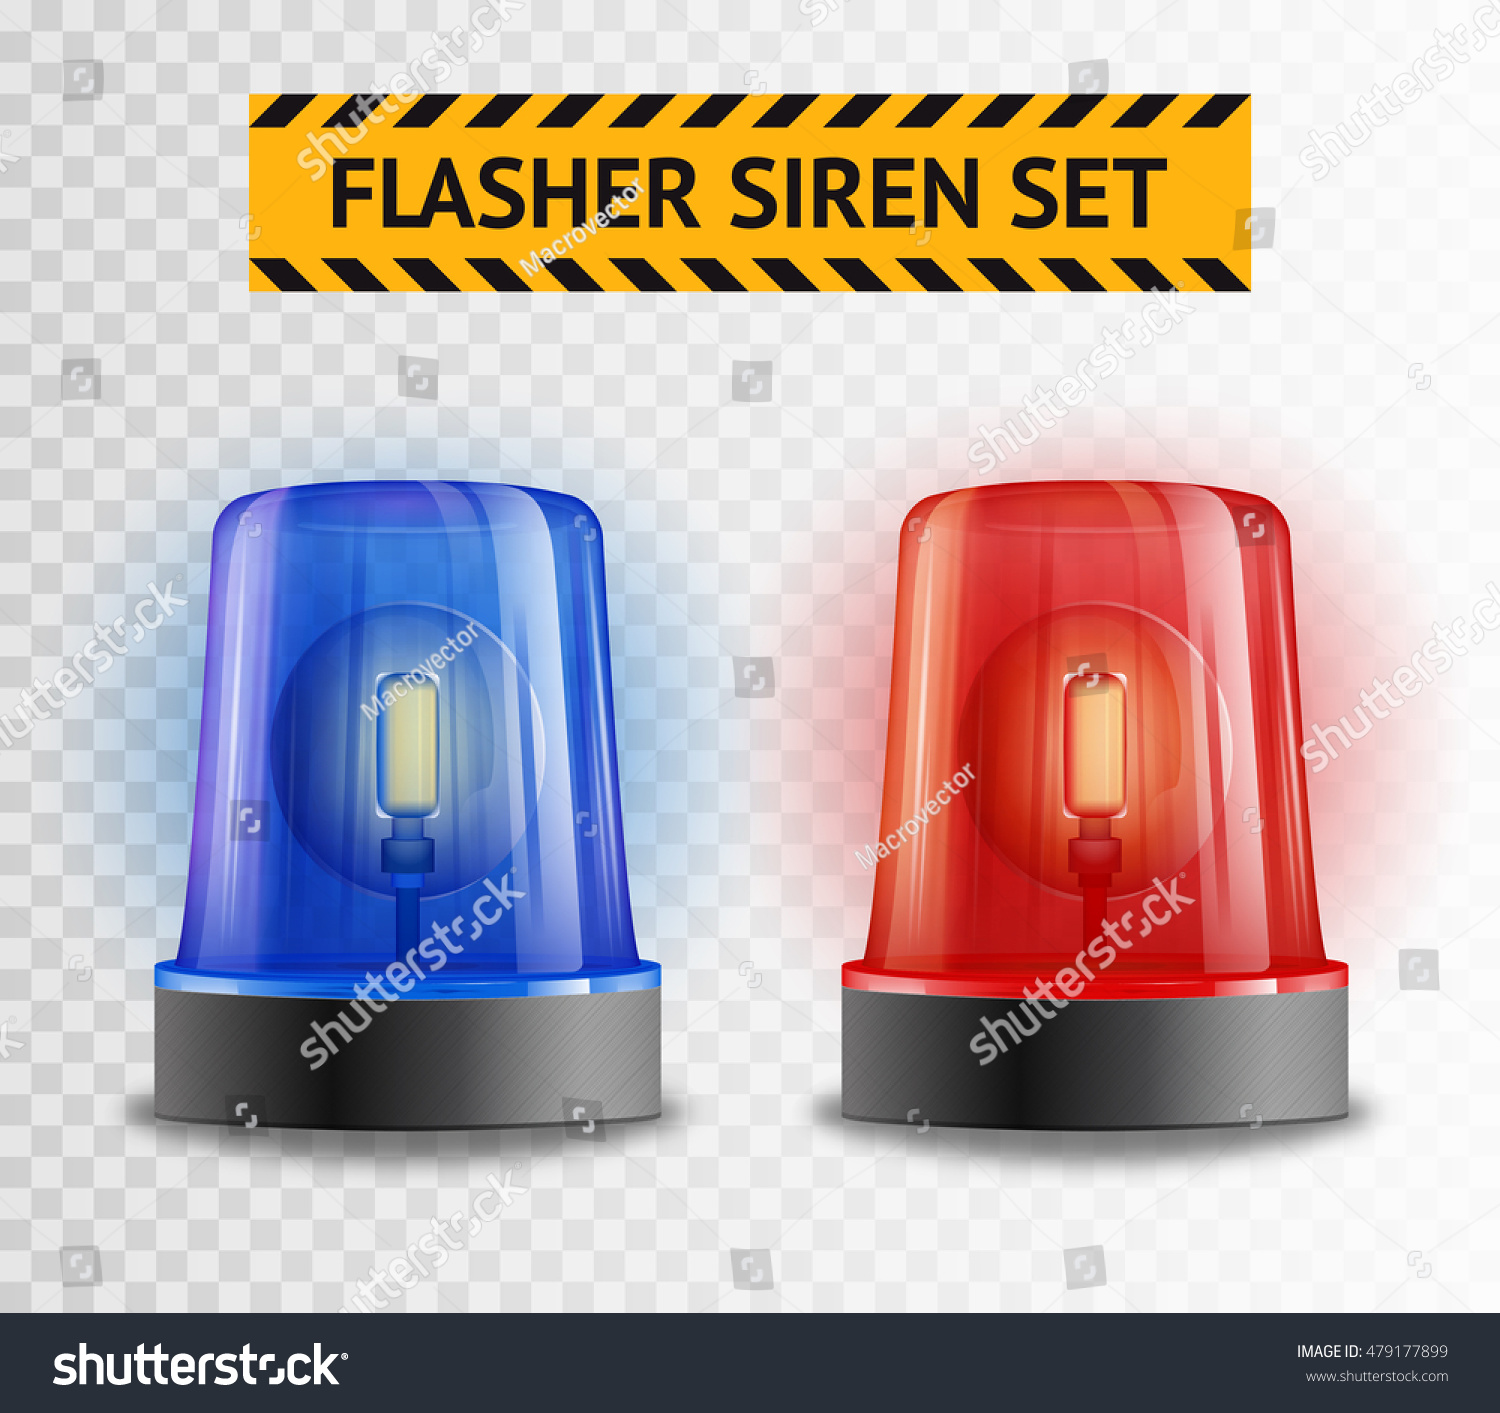 SVG of Two police flasher sirens set isolated on transparent background realistic vector illustration svg